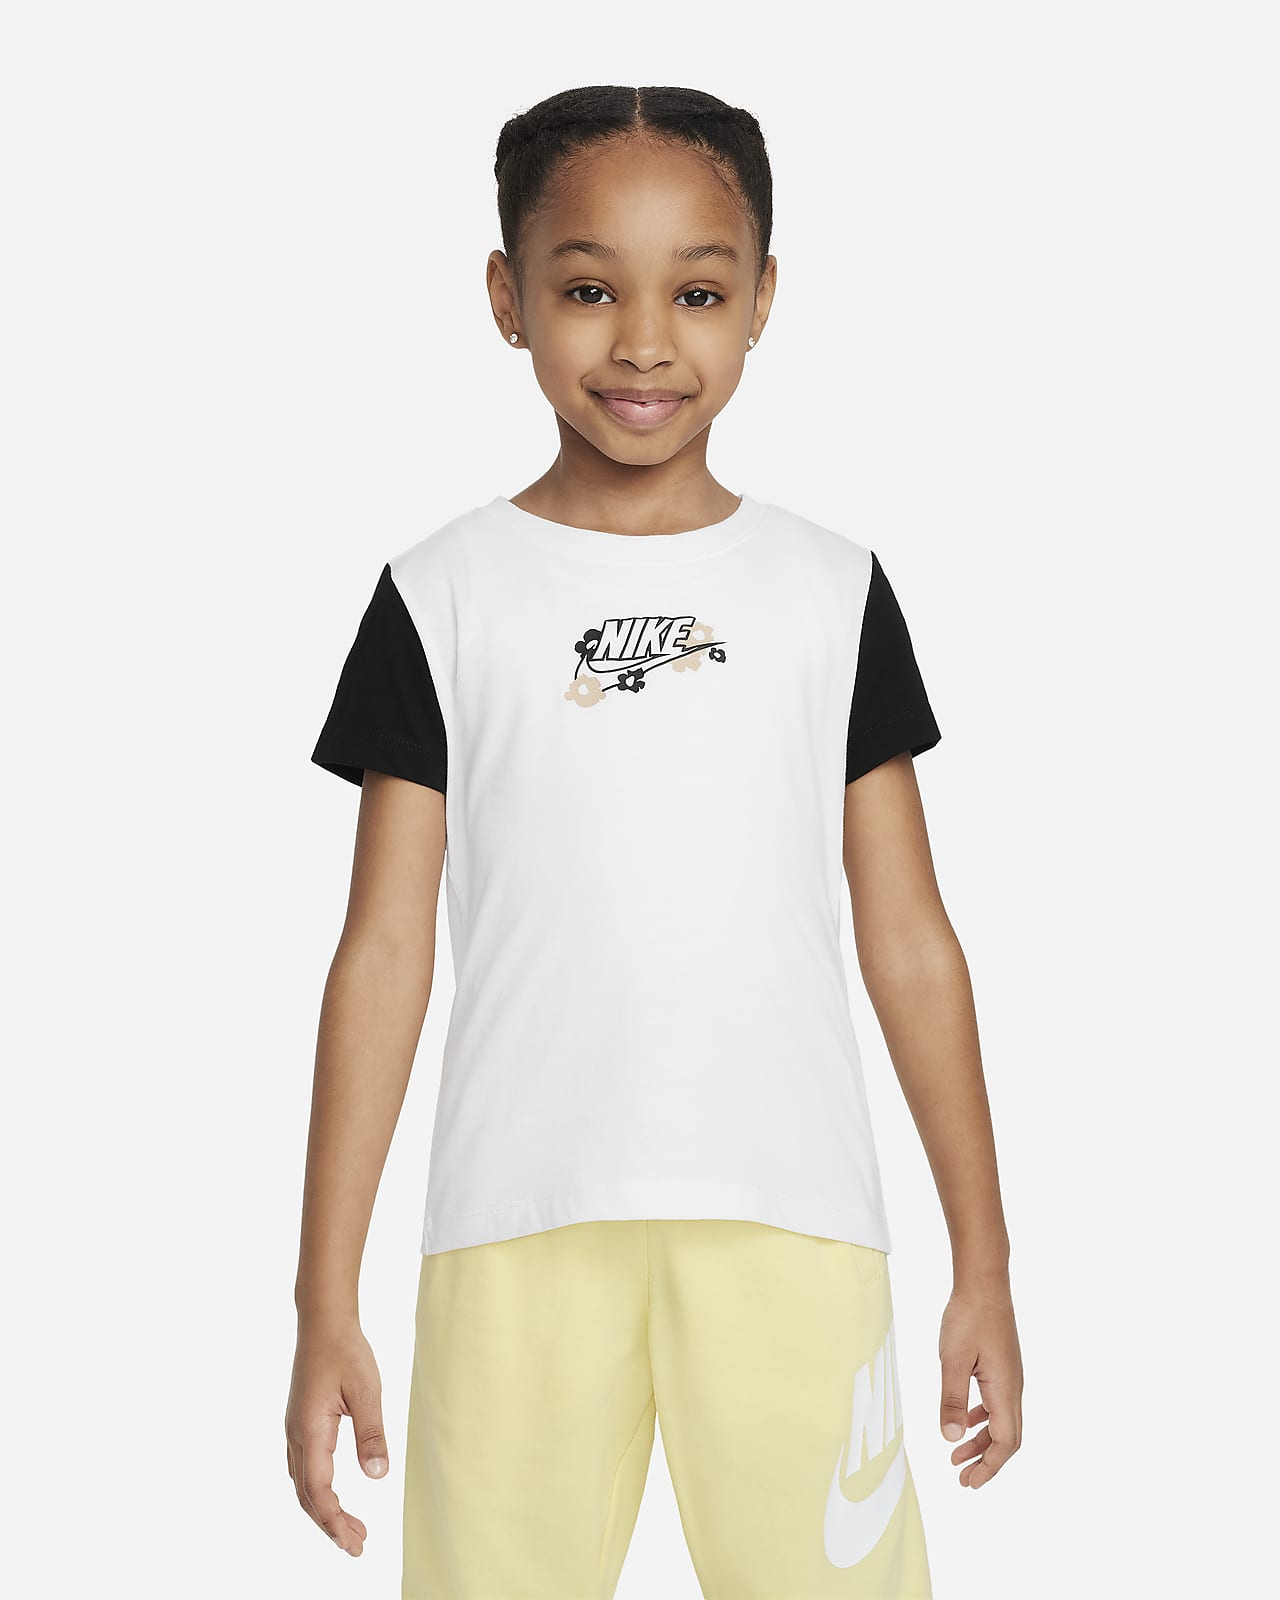 Nike 'Your Move' Younger Kids' Graphic T-Shirt